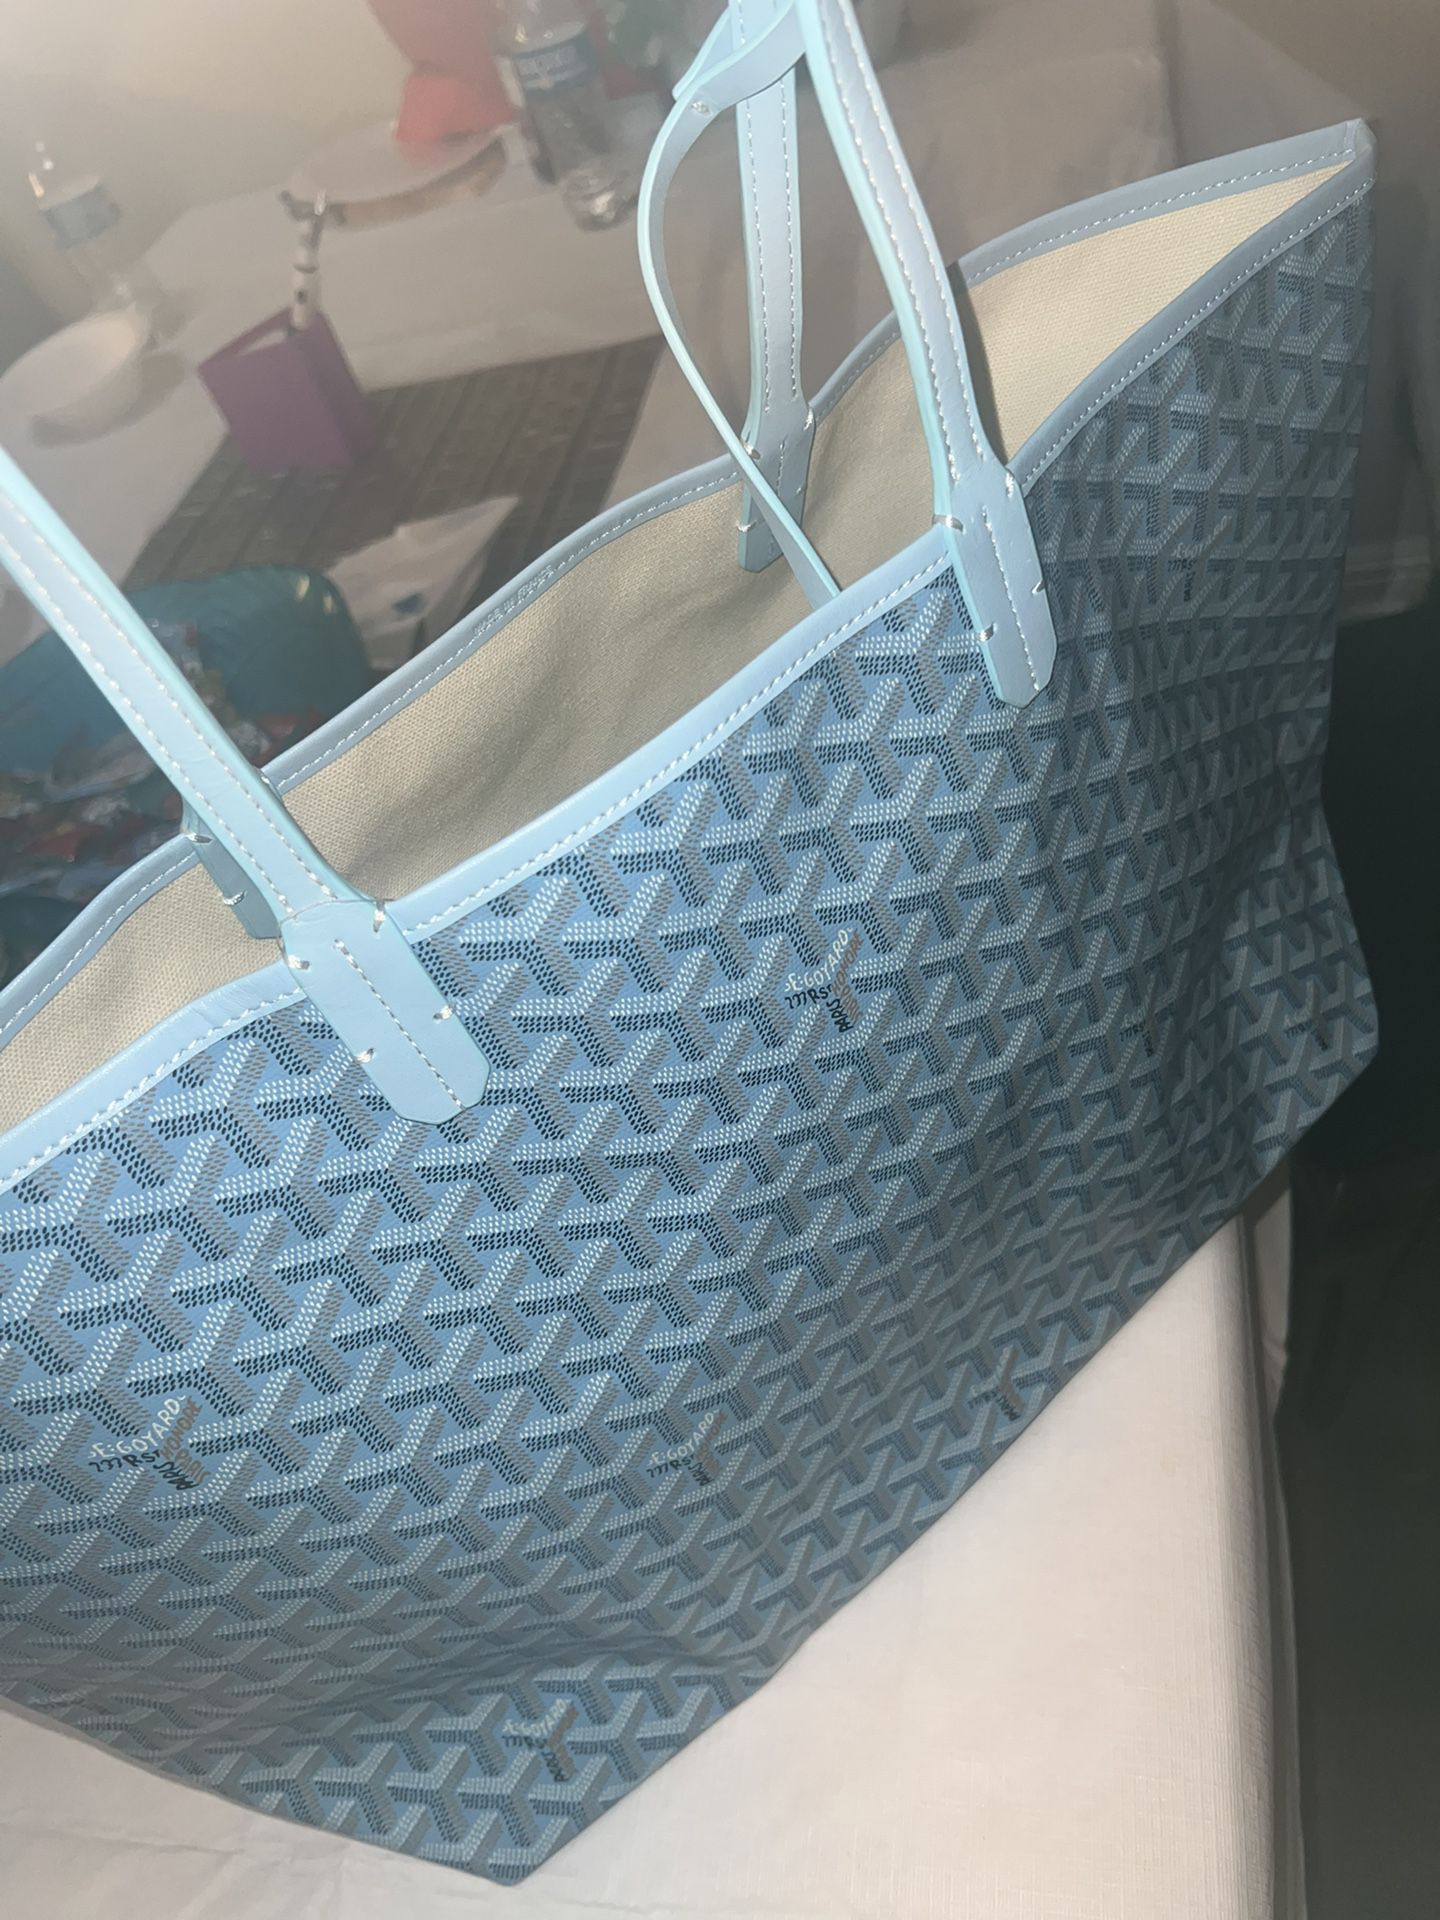 Goyard St. Louis pm Tote Bag for Sale in Cypress, CA - OfferUp